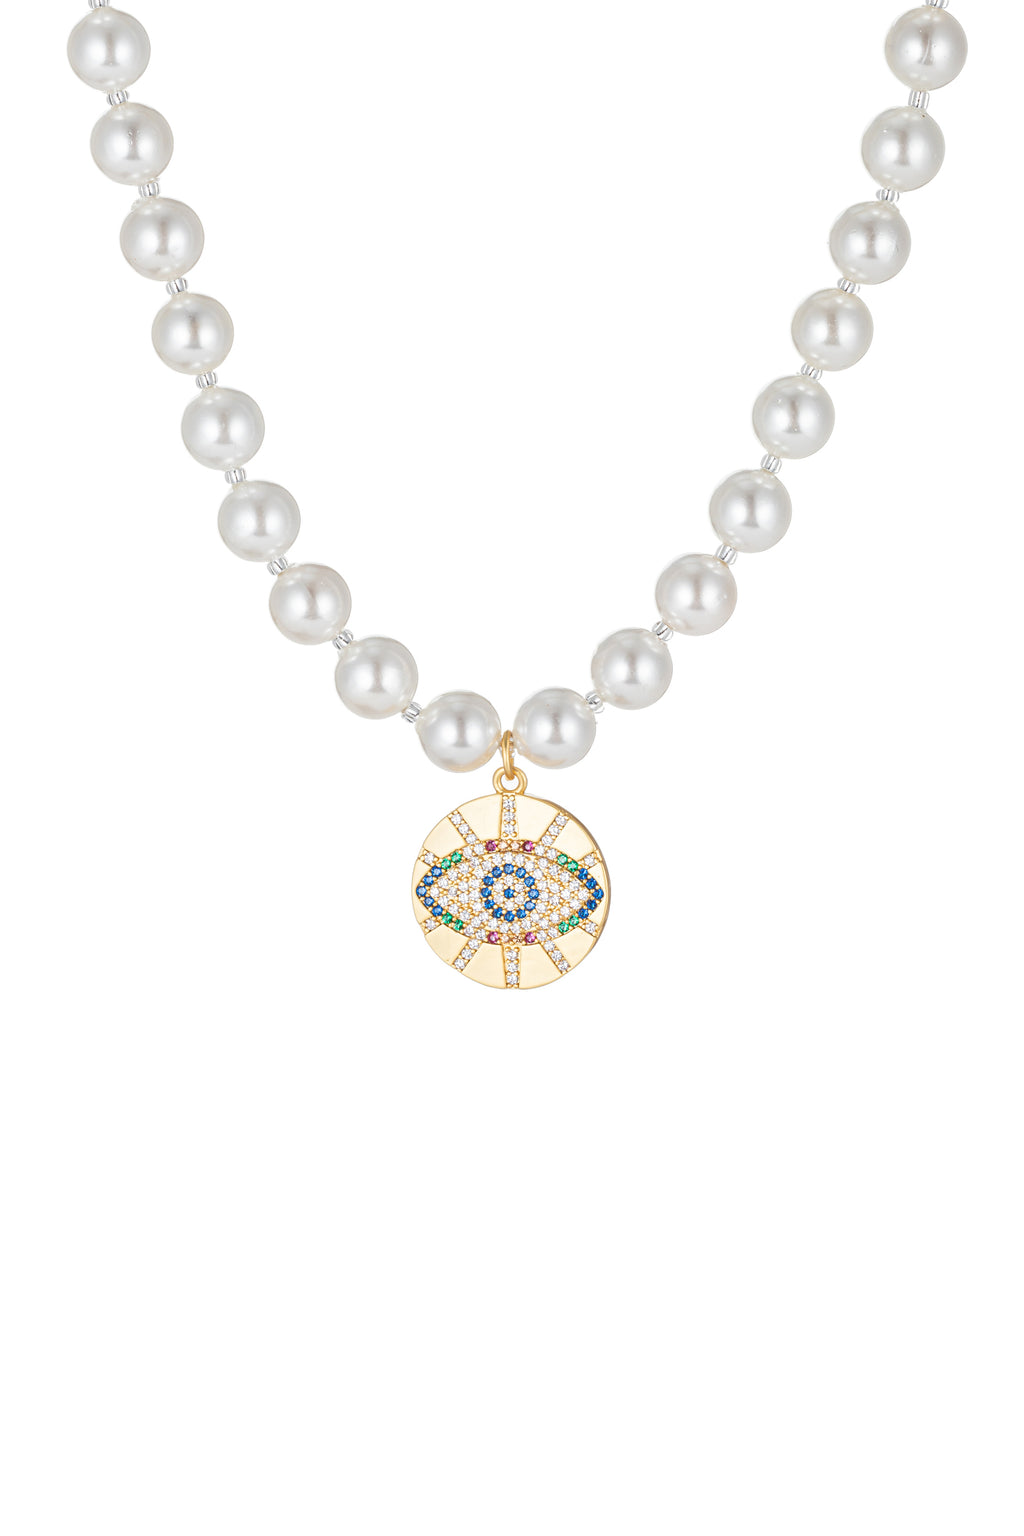 Shell pearl necklace with an evil eye pendant studded with CZ crystals.